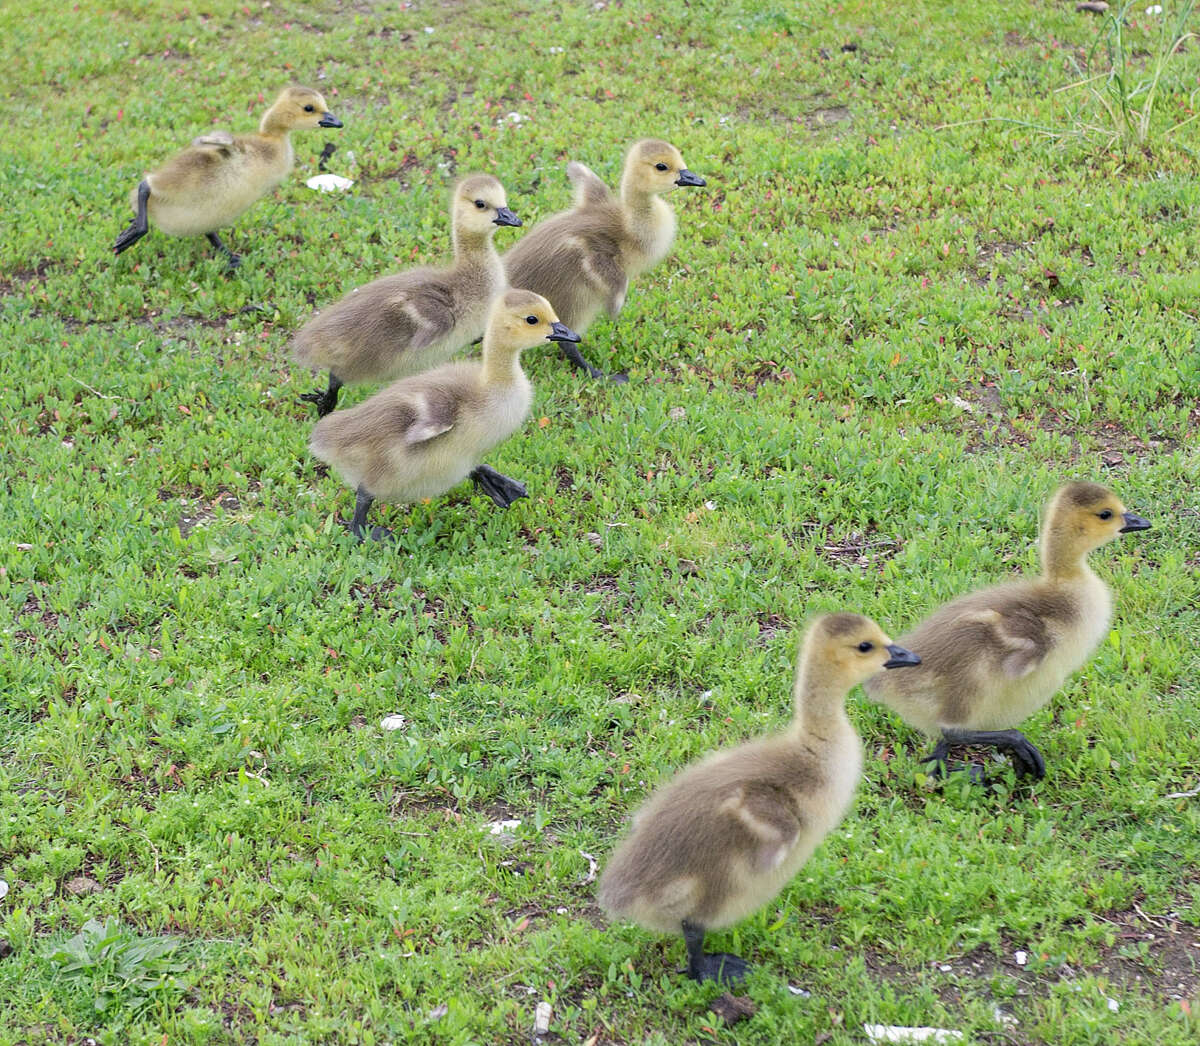 A group of baby geese at Cummings Park in Stamford, Conn., on Saturday, May 24, 2014.